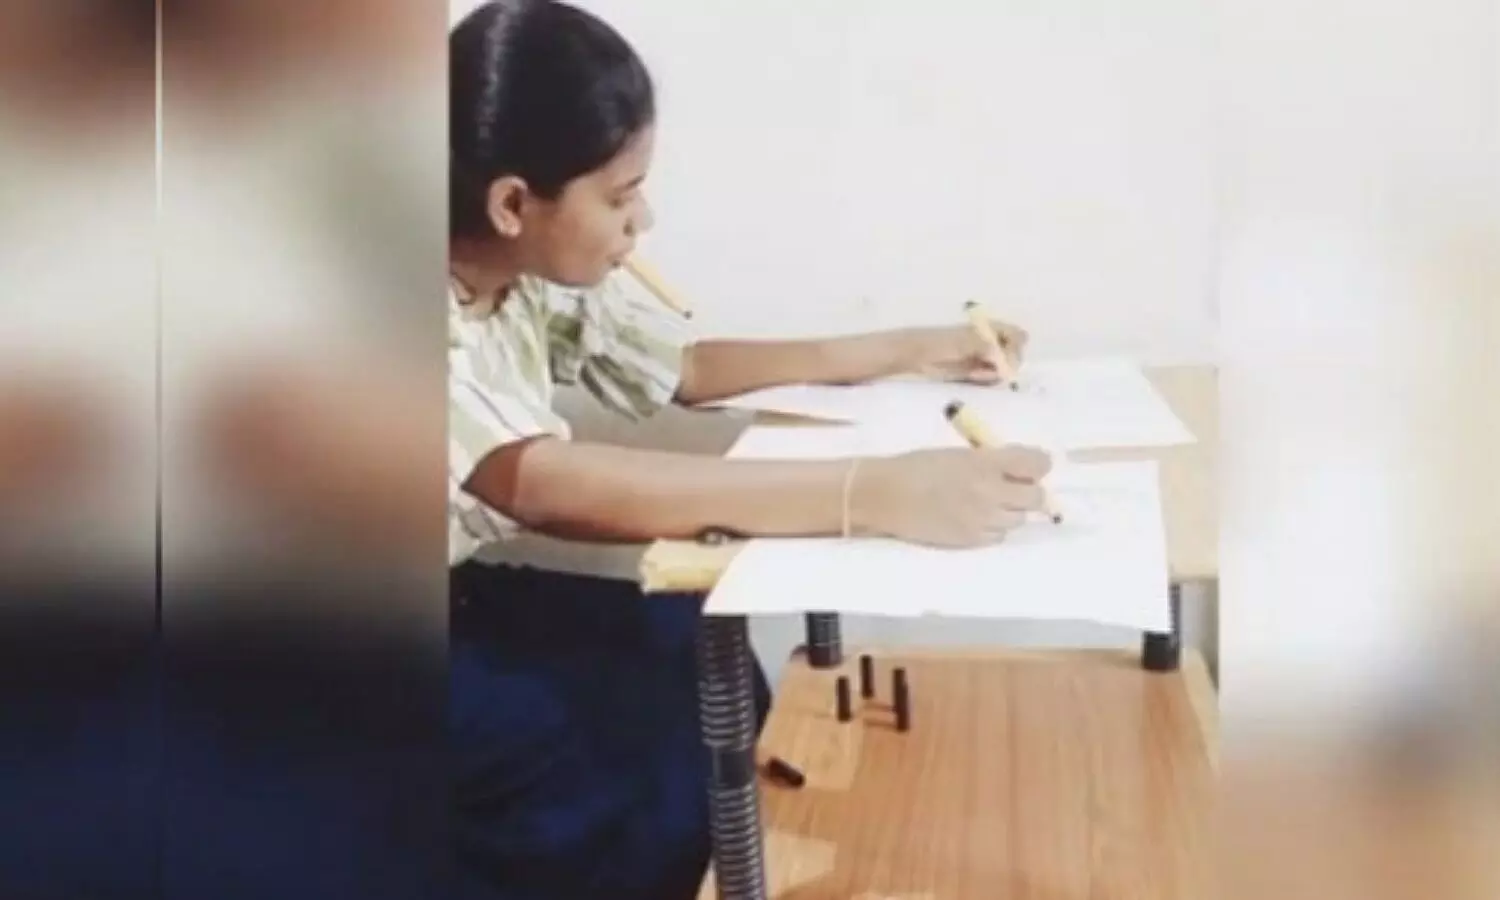 Kerala girl drawing with her hands, feet and mouth